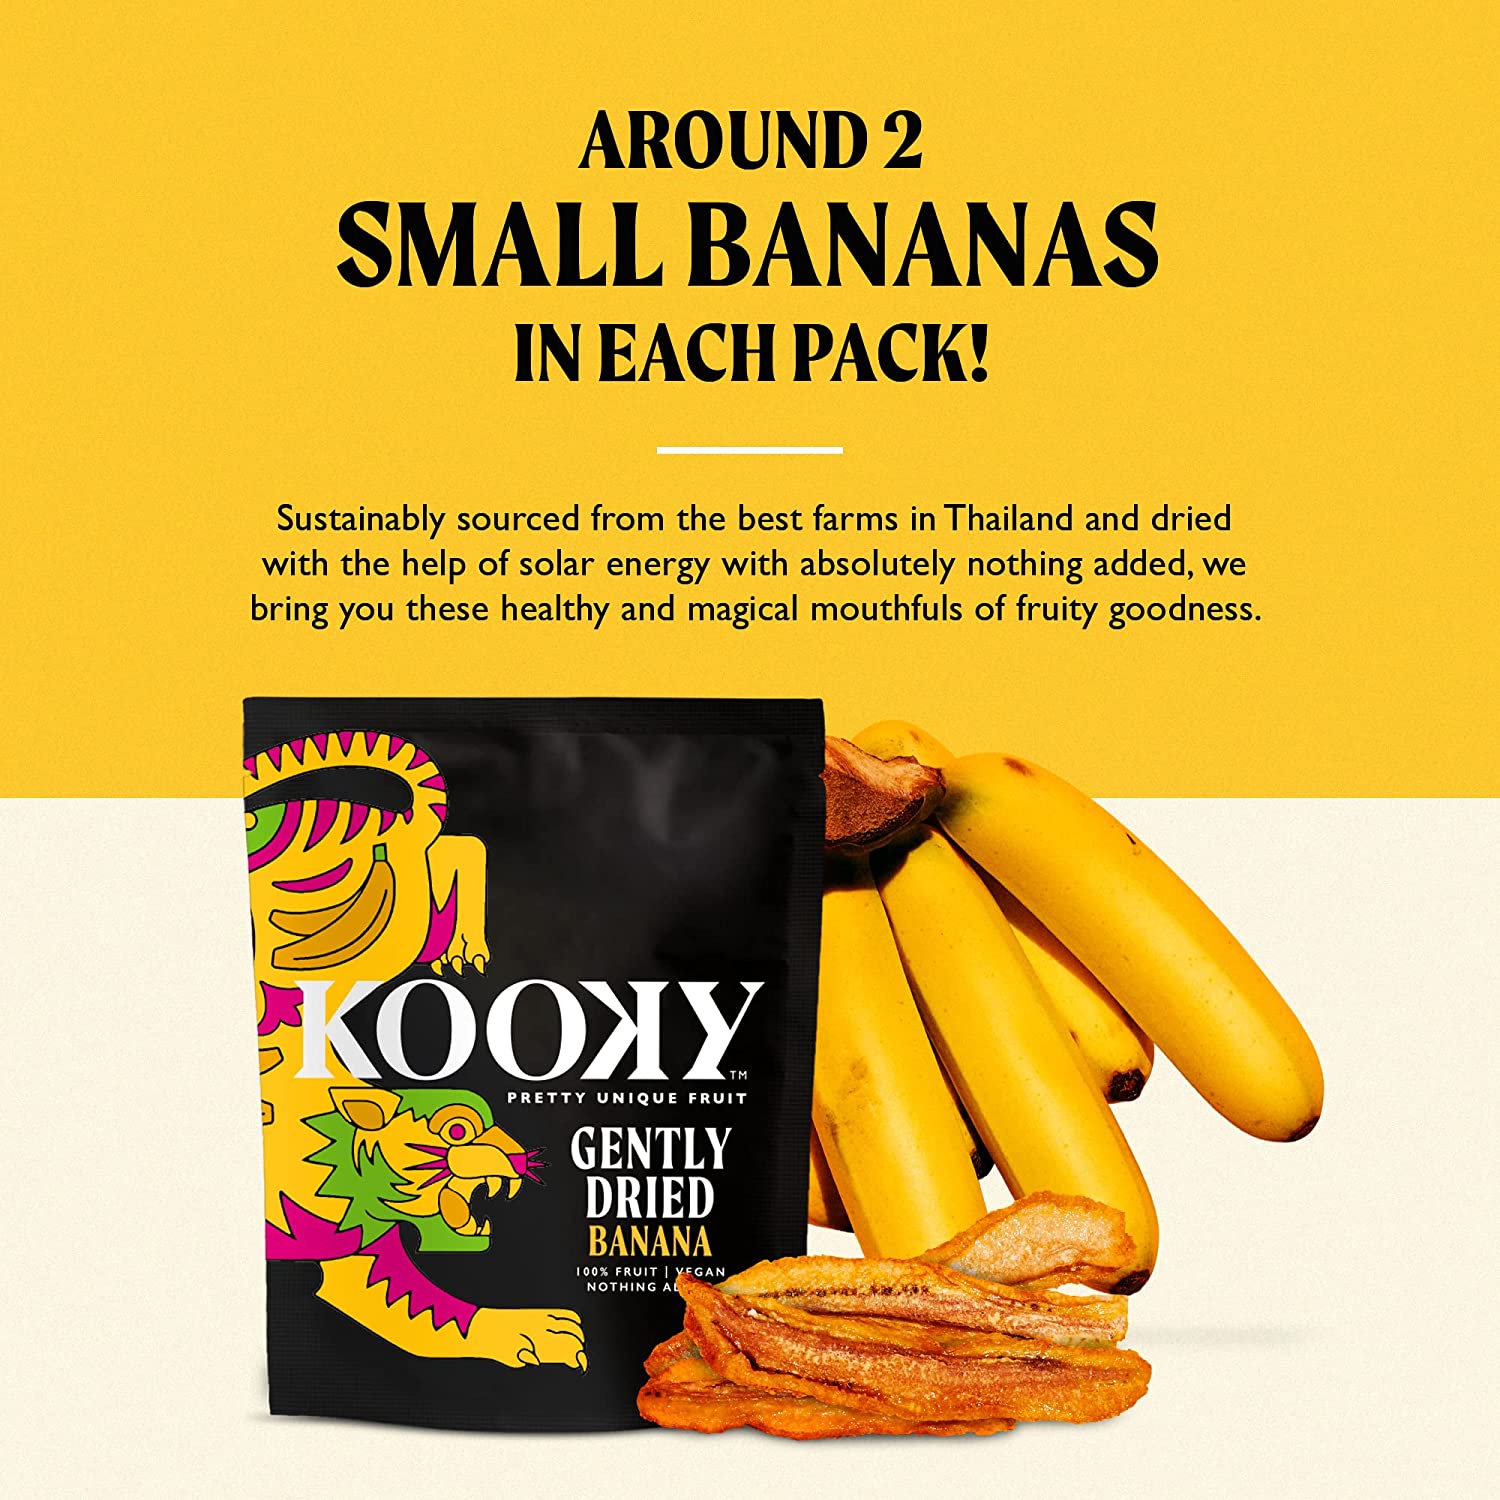 Gently Dried Banana that is sustainably sourced and all natural, with nothing added